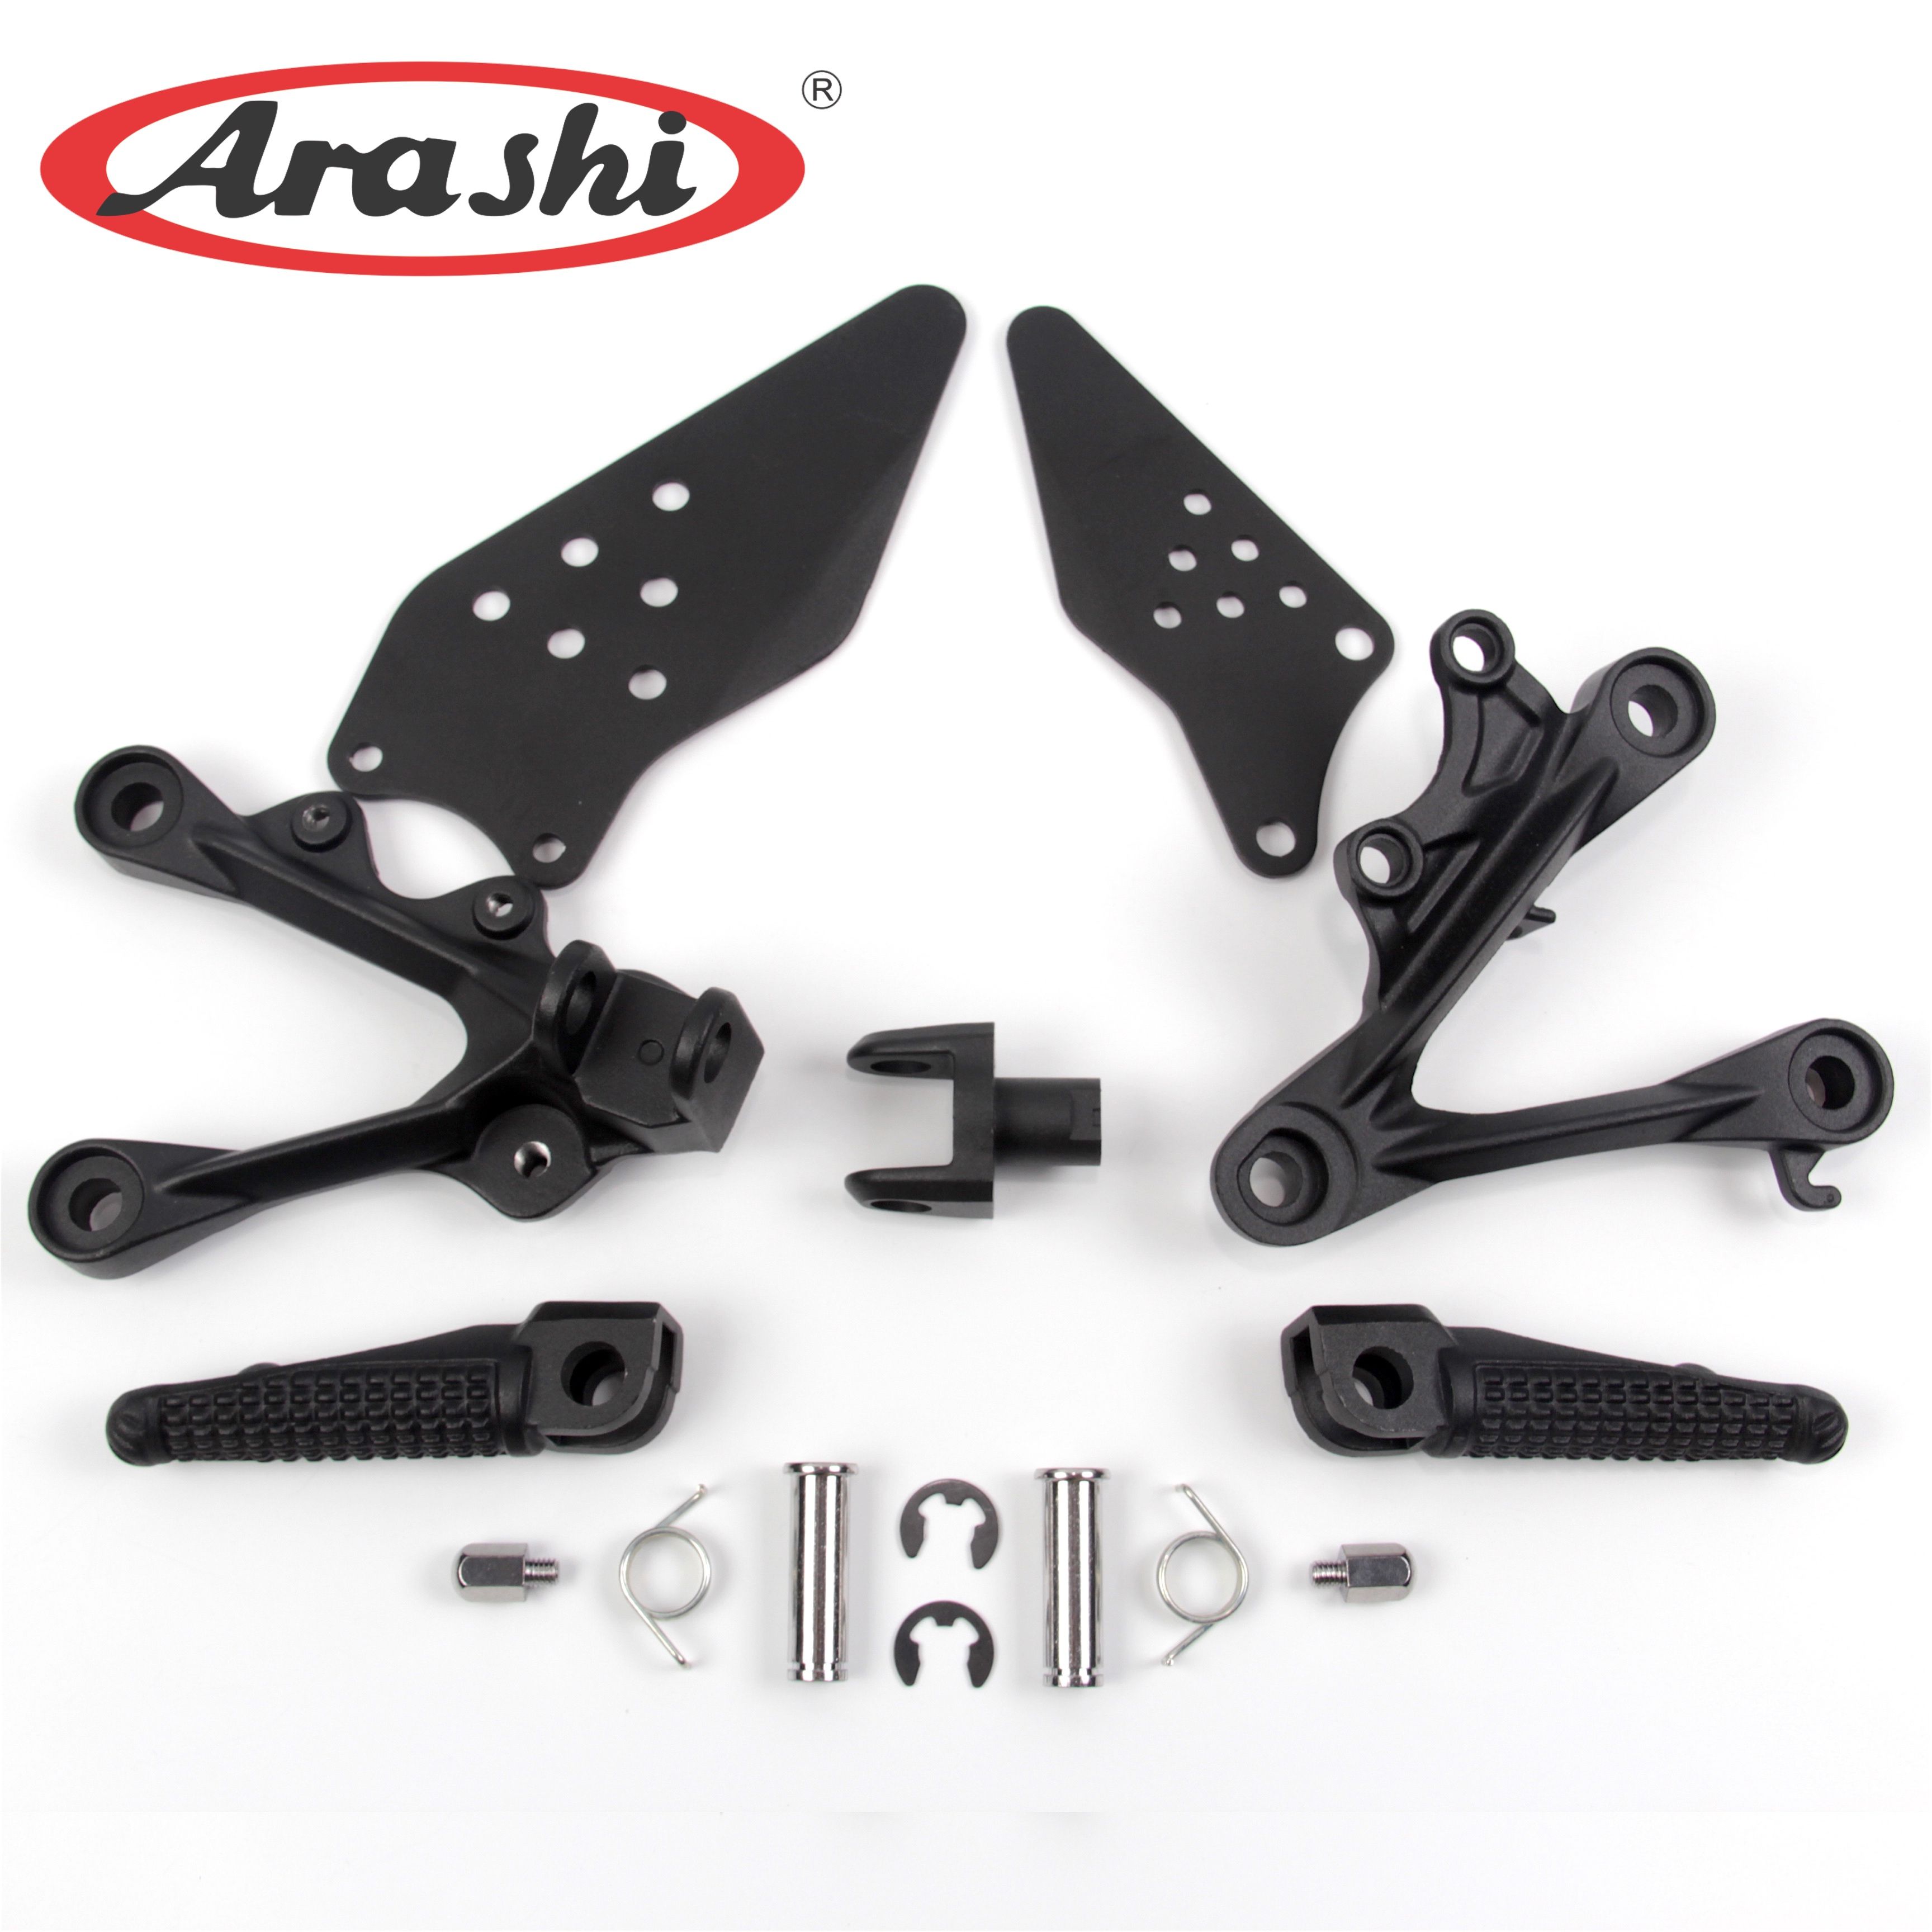 Discount Arashi Front Footrest For Kawasaki Ninja ZX6R 2009 2010 Motorcycle Foot Pegs Motor Parts ZX 6R ZX 6R Top Motorcycle Parts Online Shop | DHgate.Com